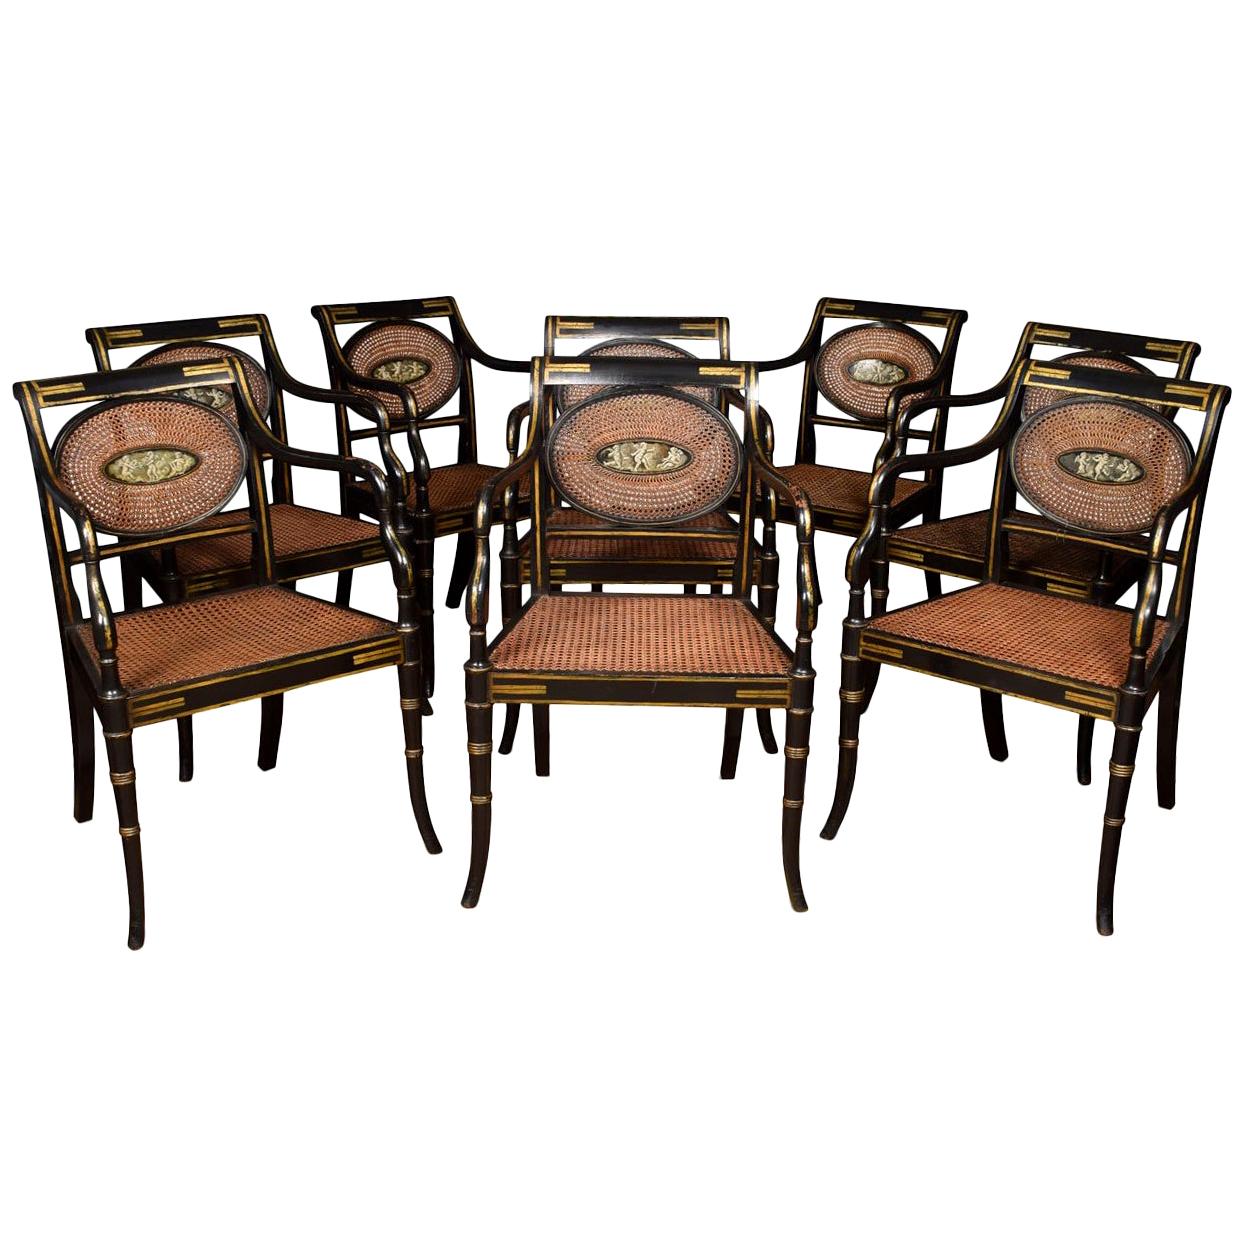 Refined Set of Eight English Regency Cane Armchairs